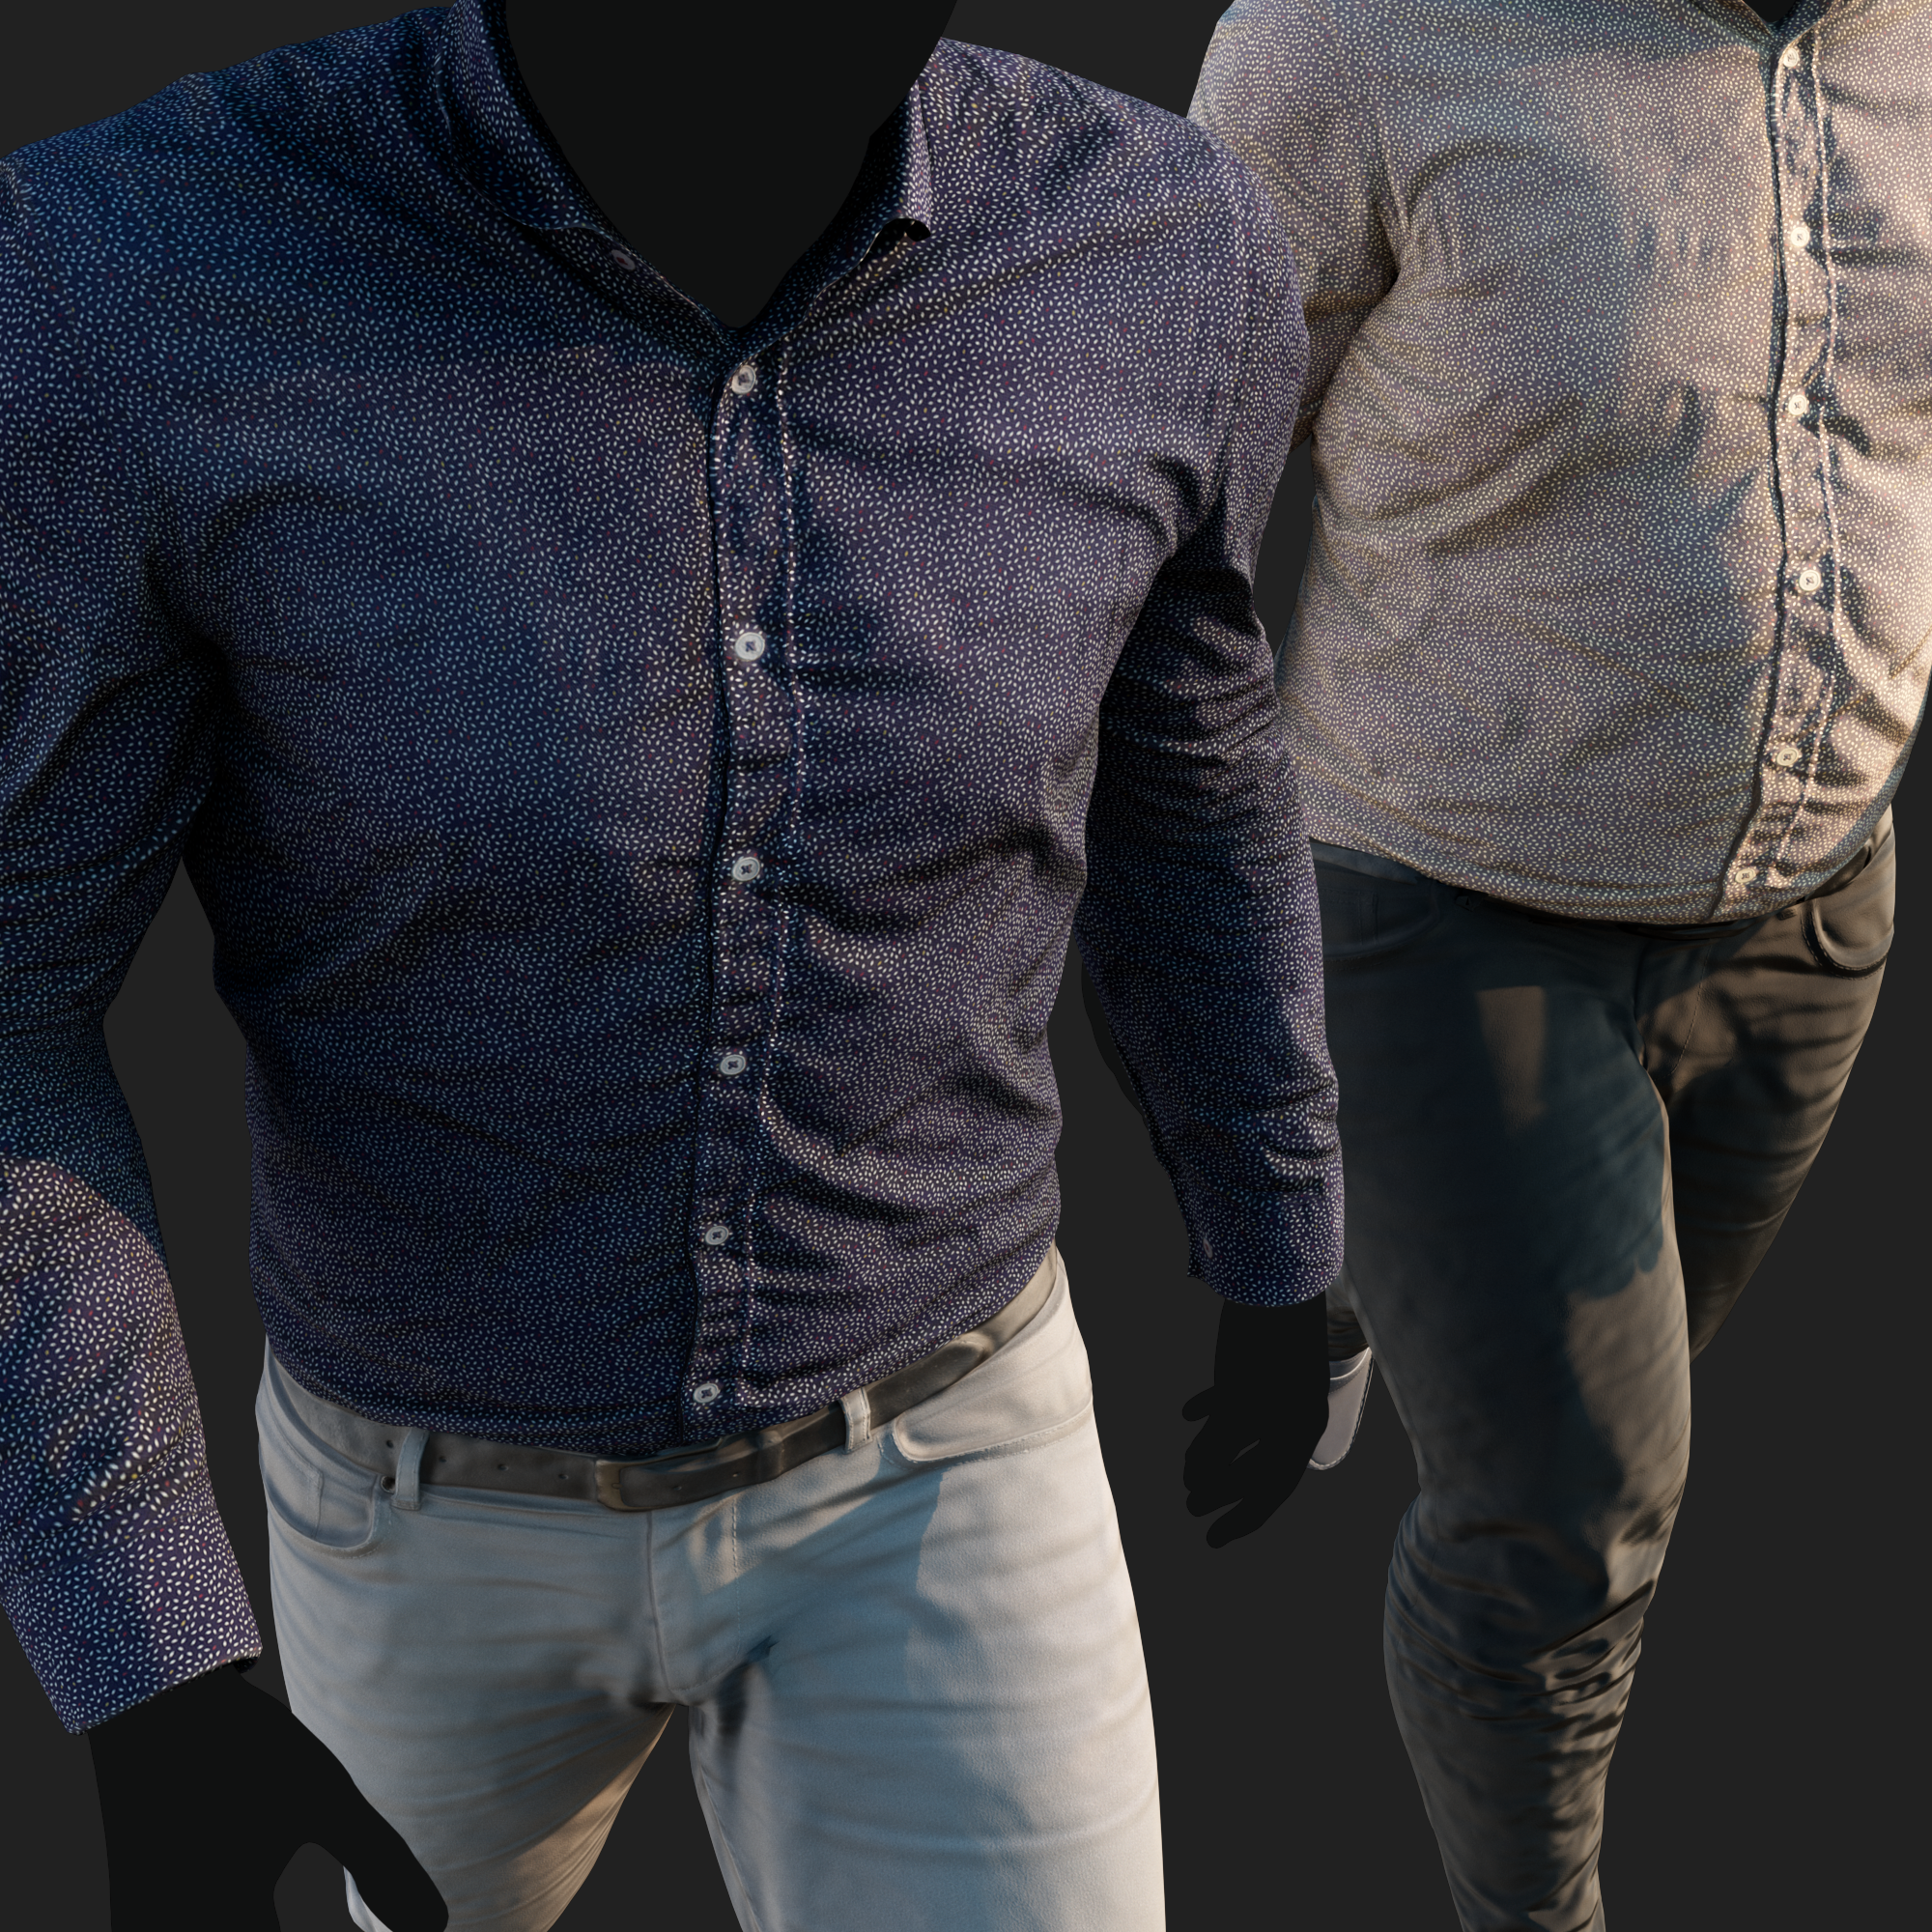 Realistic rendering of a 3D model of an animated walking male character dressed in a Camouflage Jacket and Jeans - top view